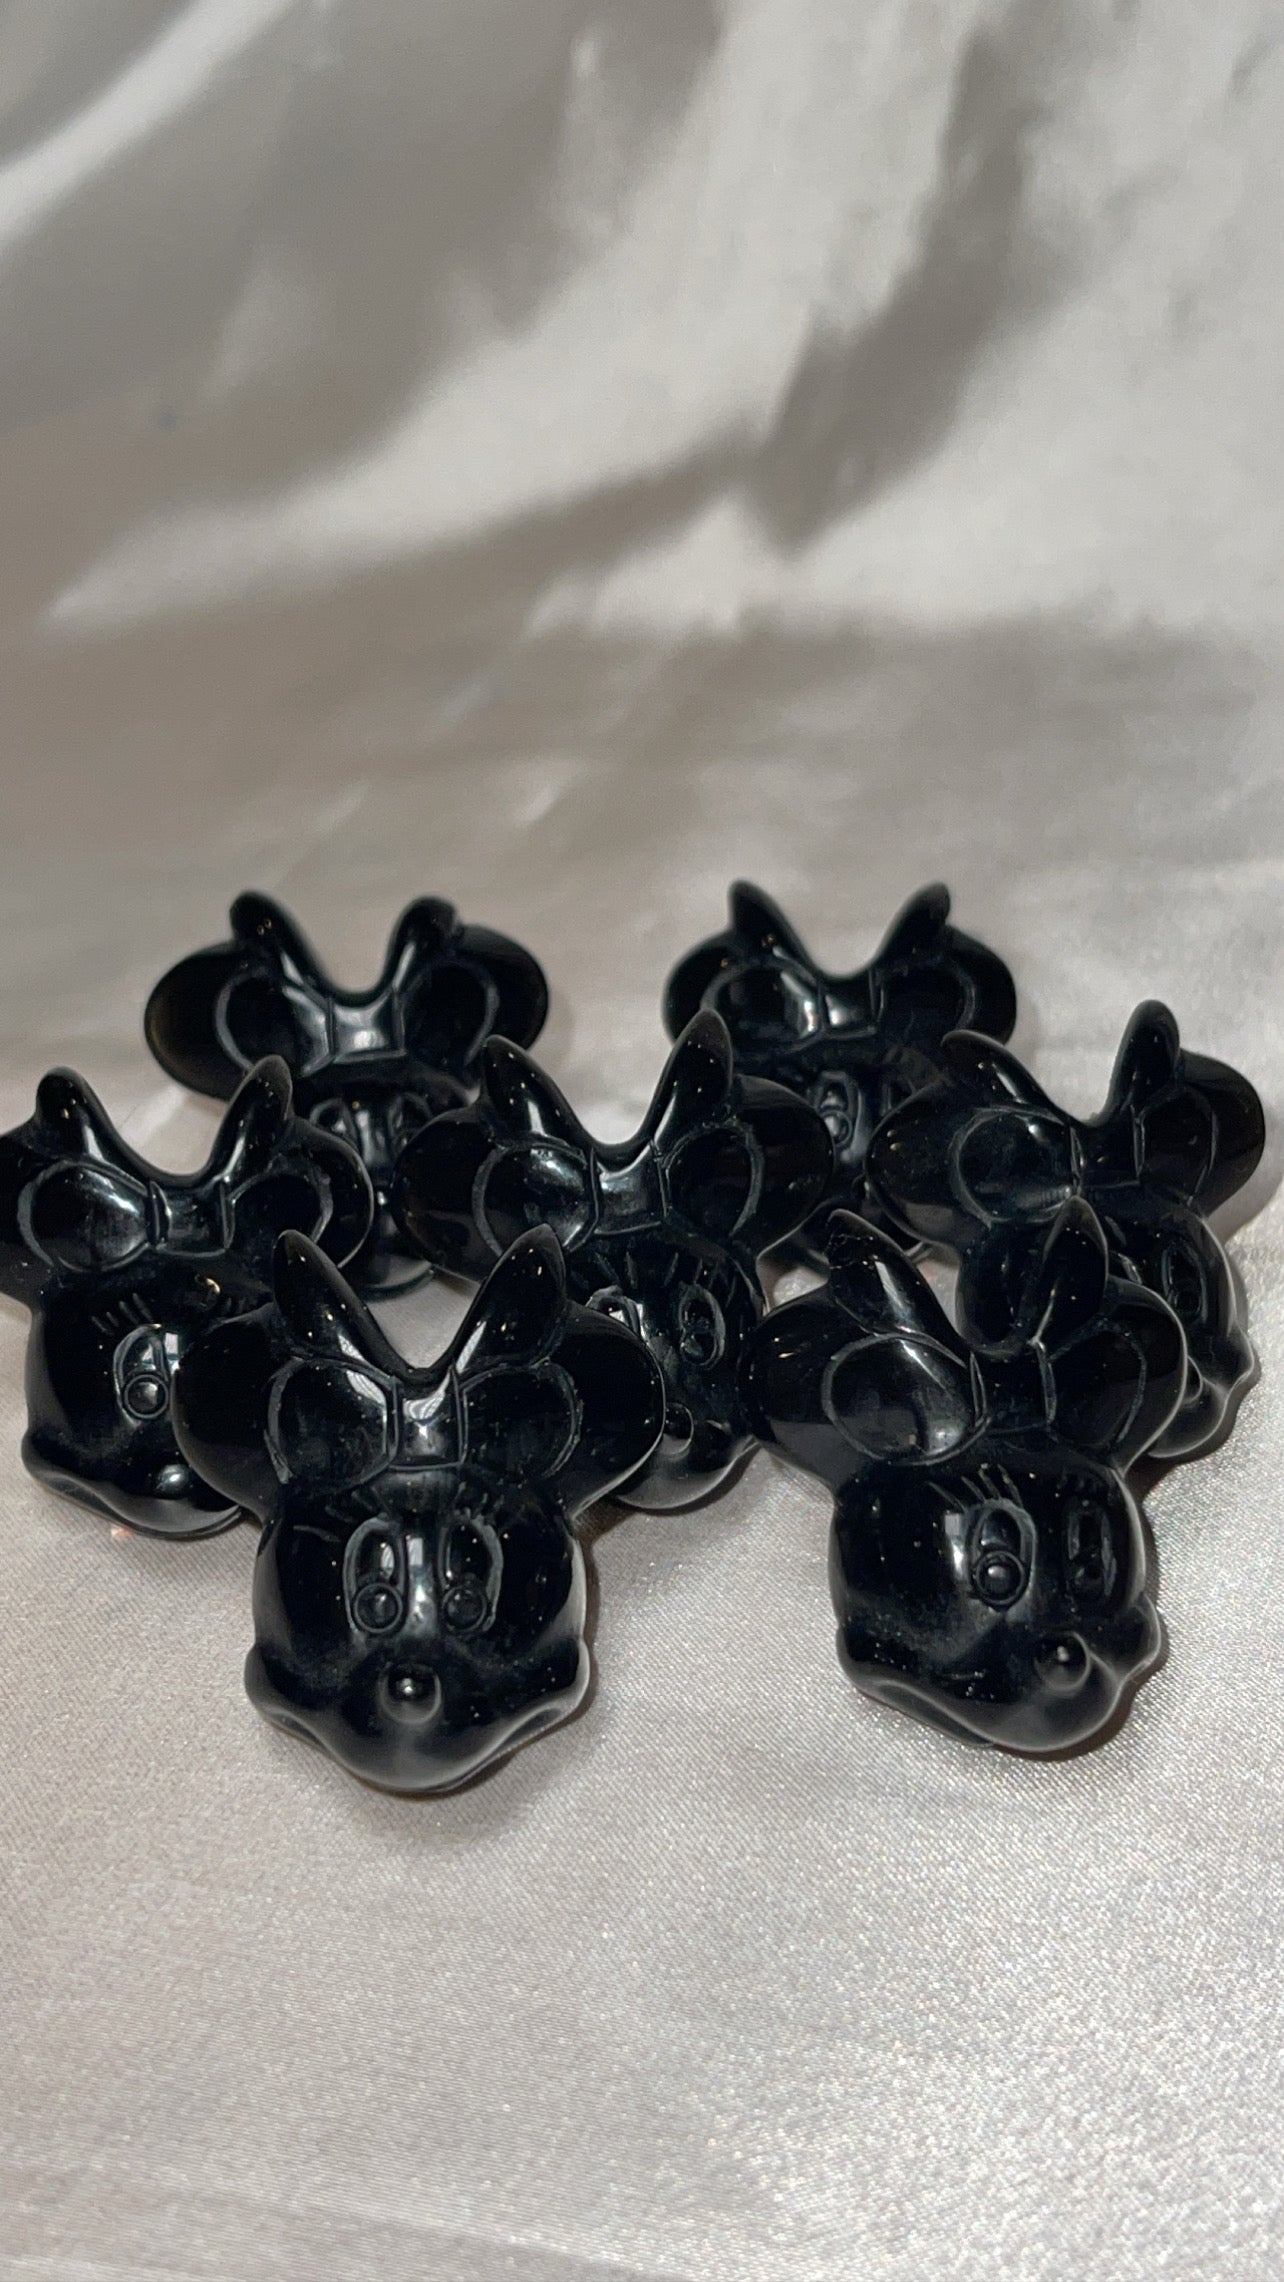 Obsidian Minnie Mouse Carving